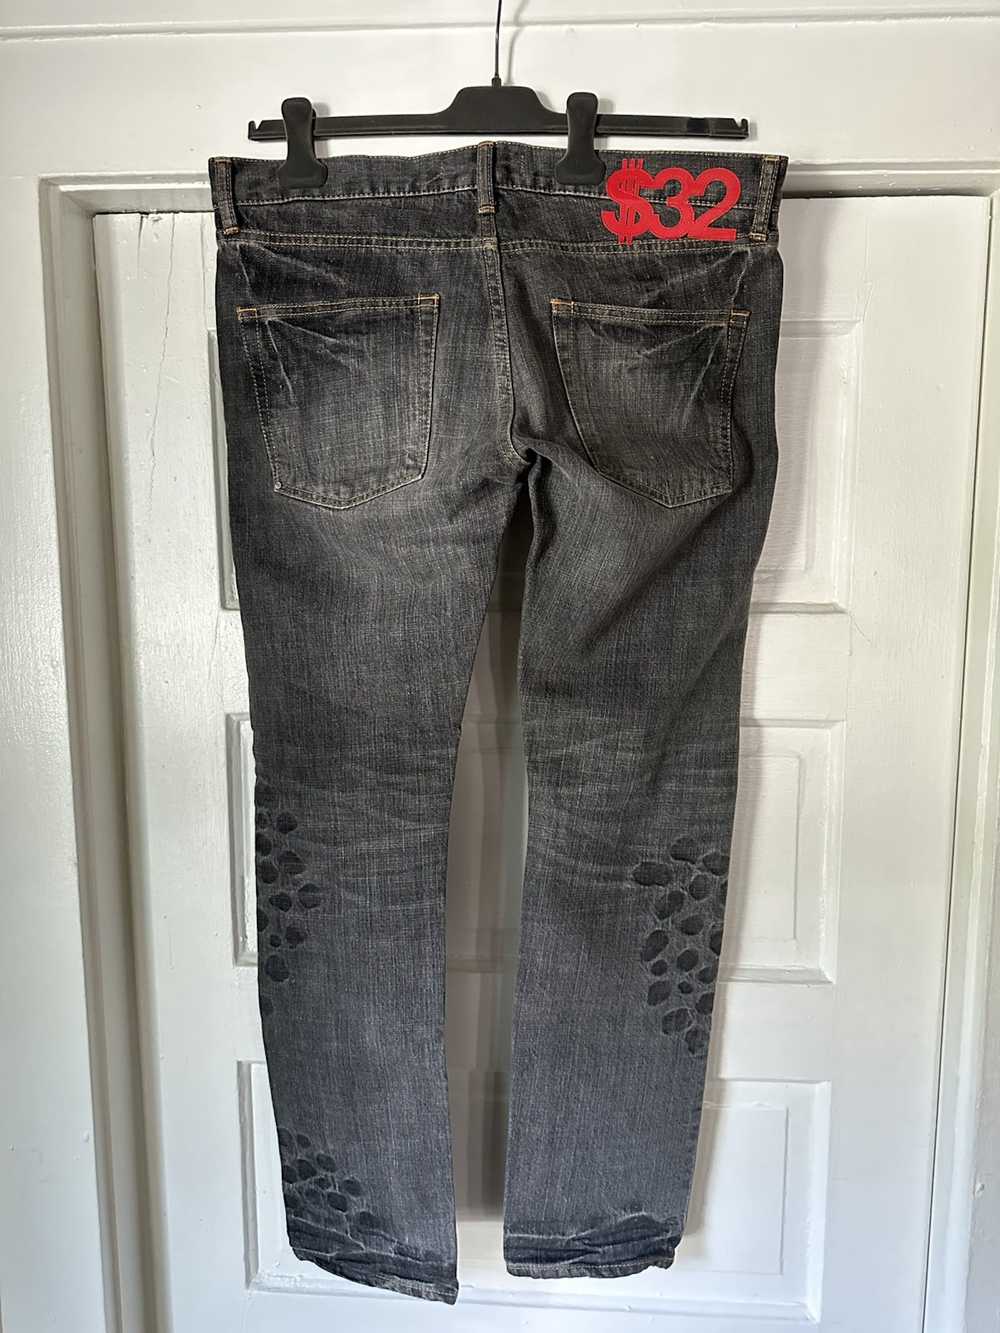 Swagger Swagger $32 Reptile Denim Jeans - image 2